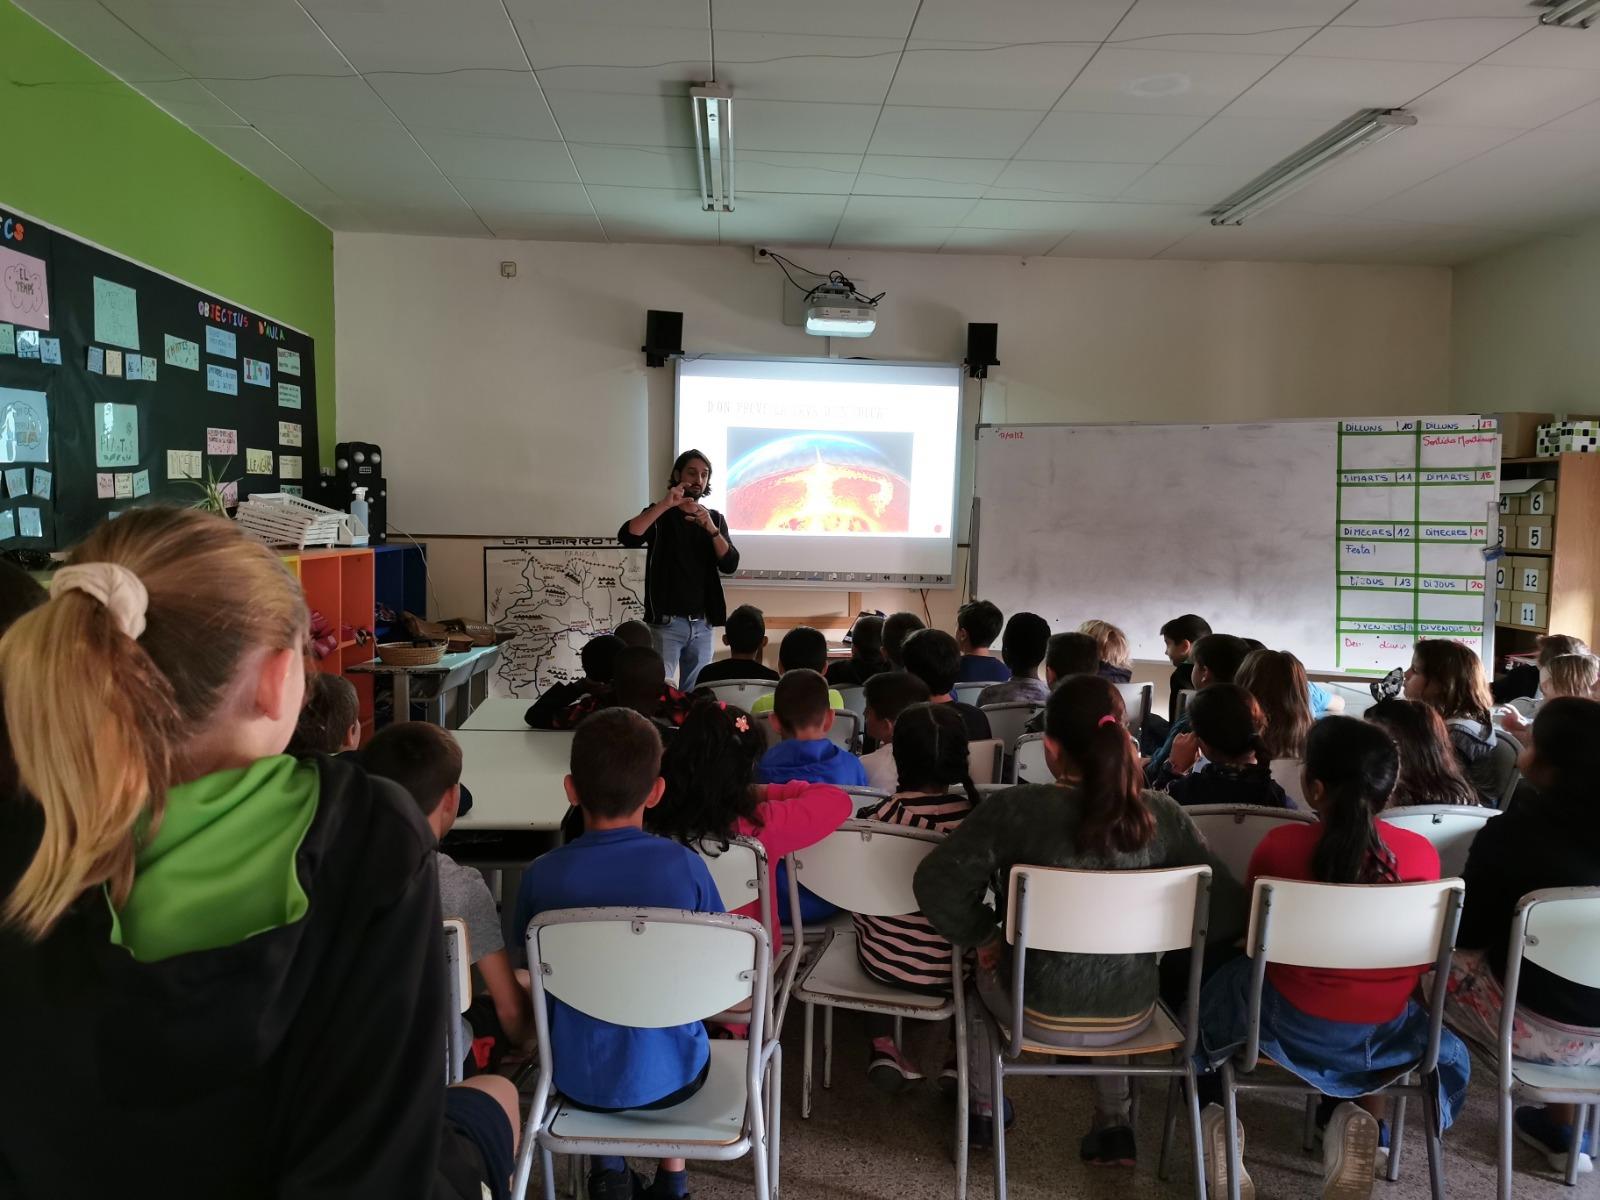 How many volcanoes are there in the world? How many are erupting?, byXavier de Bolòs, resident in Faberllull Olot during the Volcanology stay, speaks at Escola Pia d'Olot about the formation of volcanoes, how many volcanoes there are in the world, how many are erupting, monogenetic and  Xavier Bolós